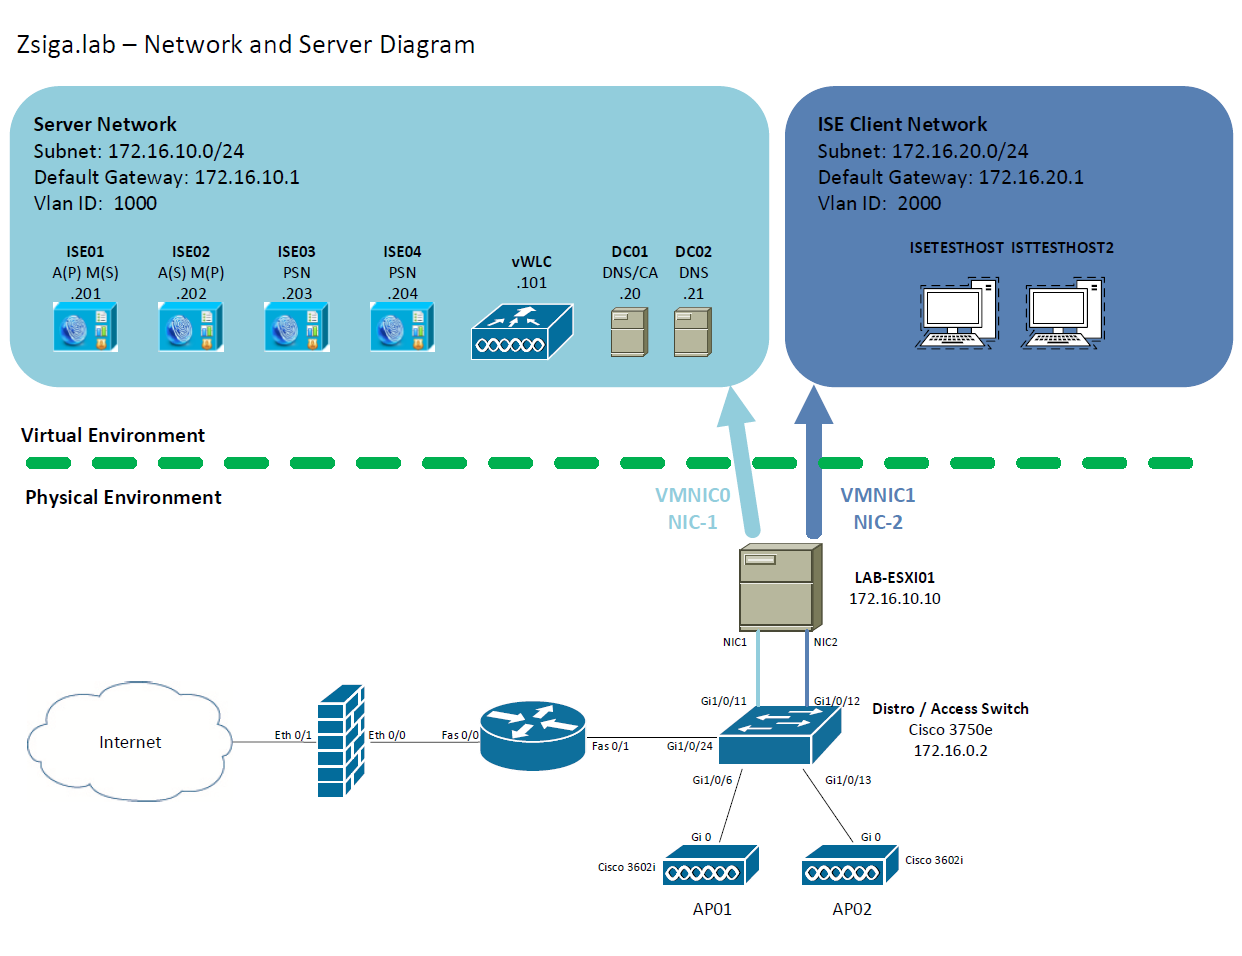 Understanding eap-fast and chaining  implementations on anyconnect nam and ise - cisco